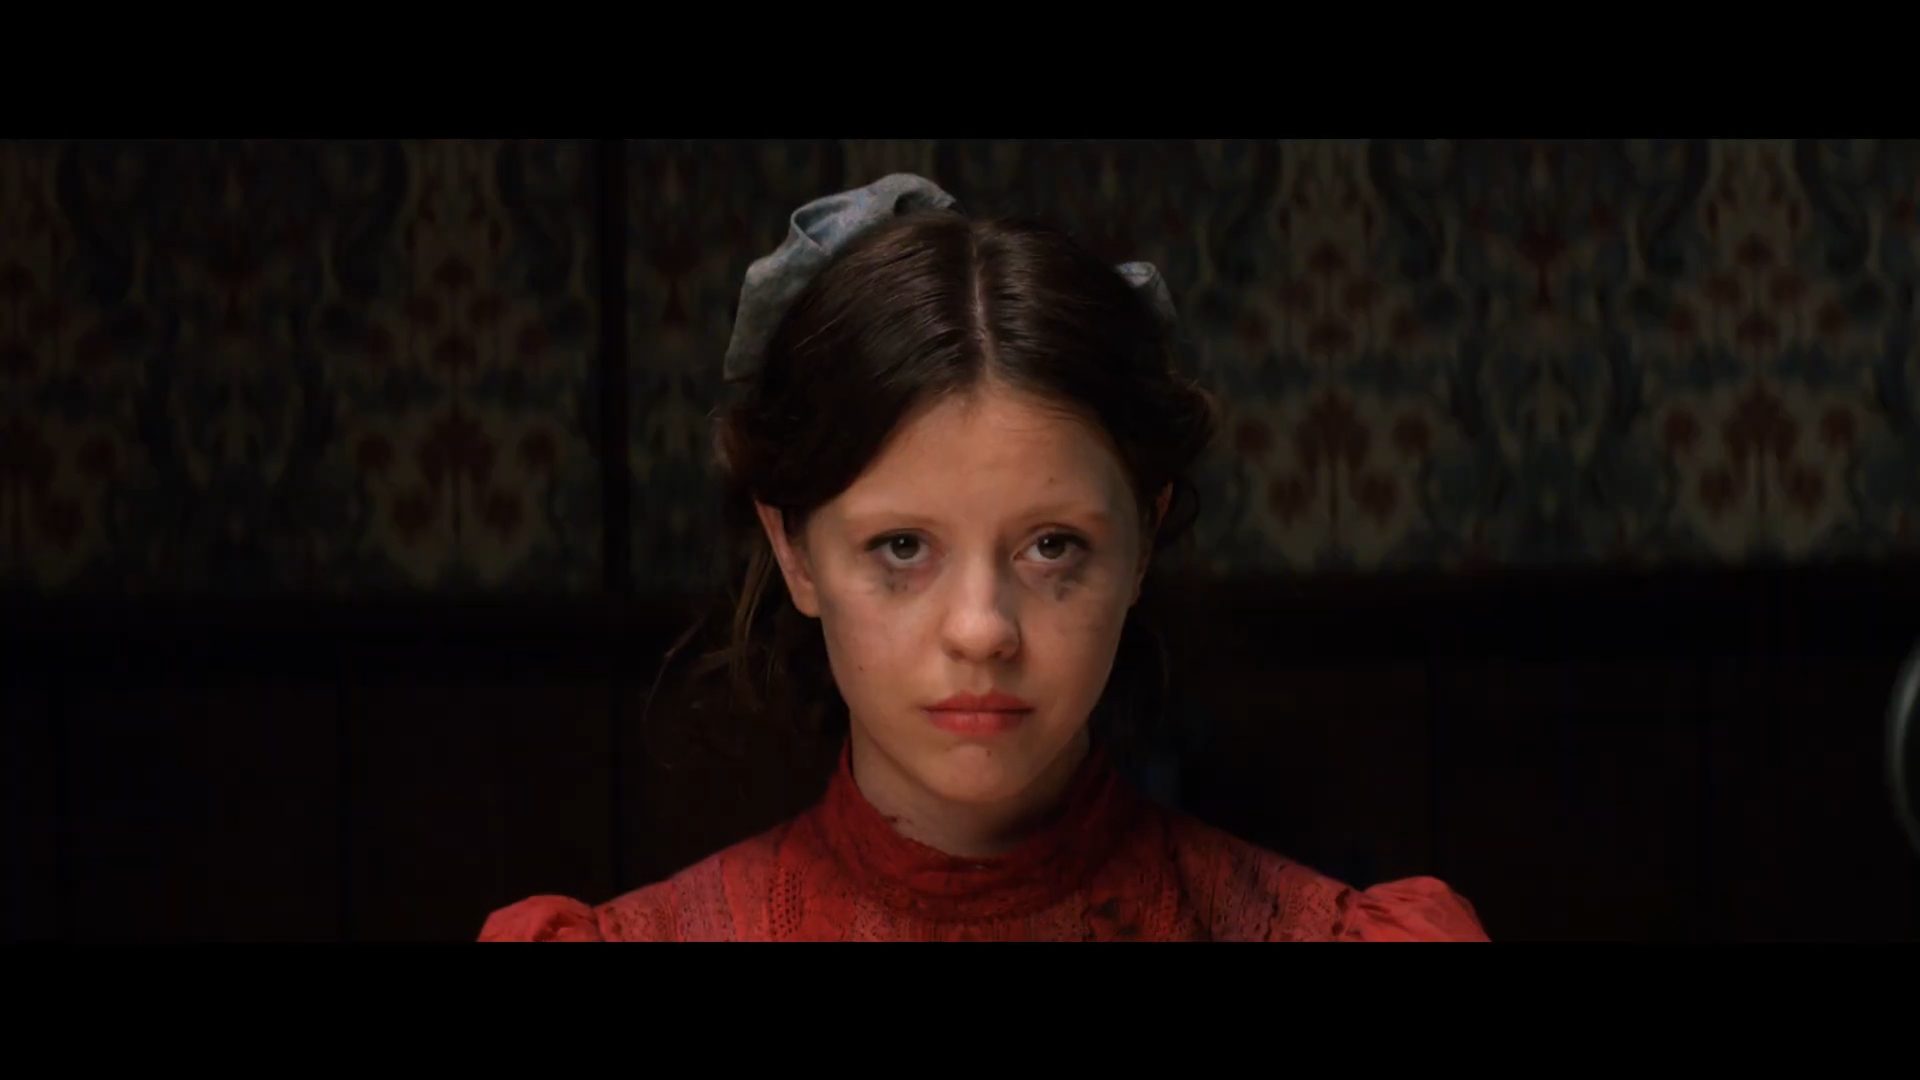 Mia Goth Commands the Screen as 'Pearl' in the Blood-Soaked Prequel to 'X'! -Movie Review